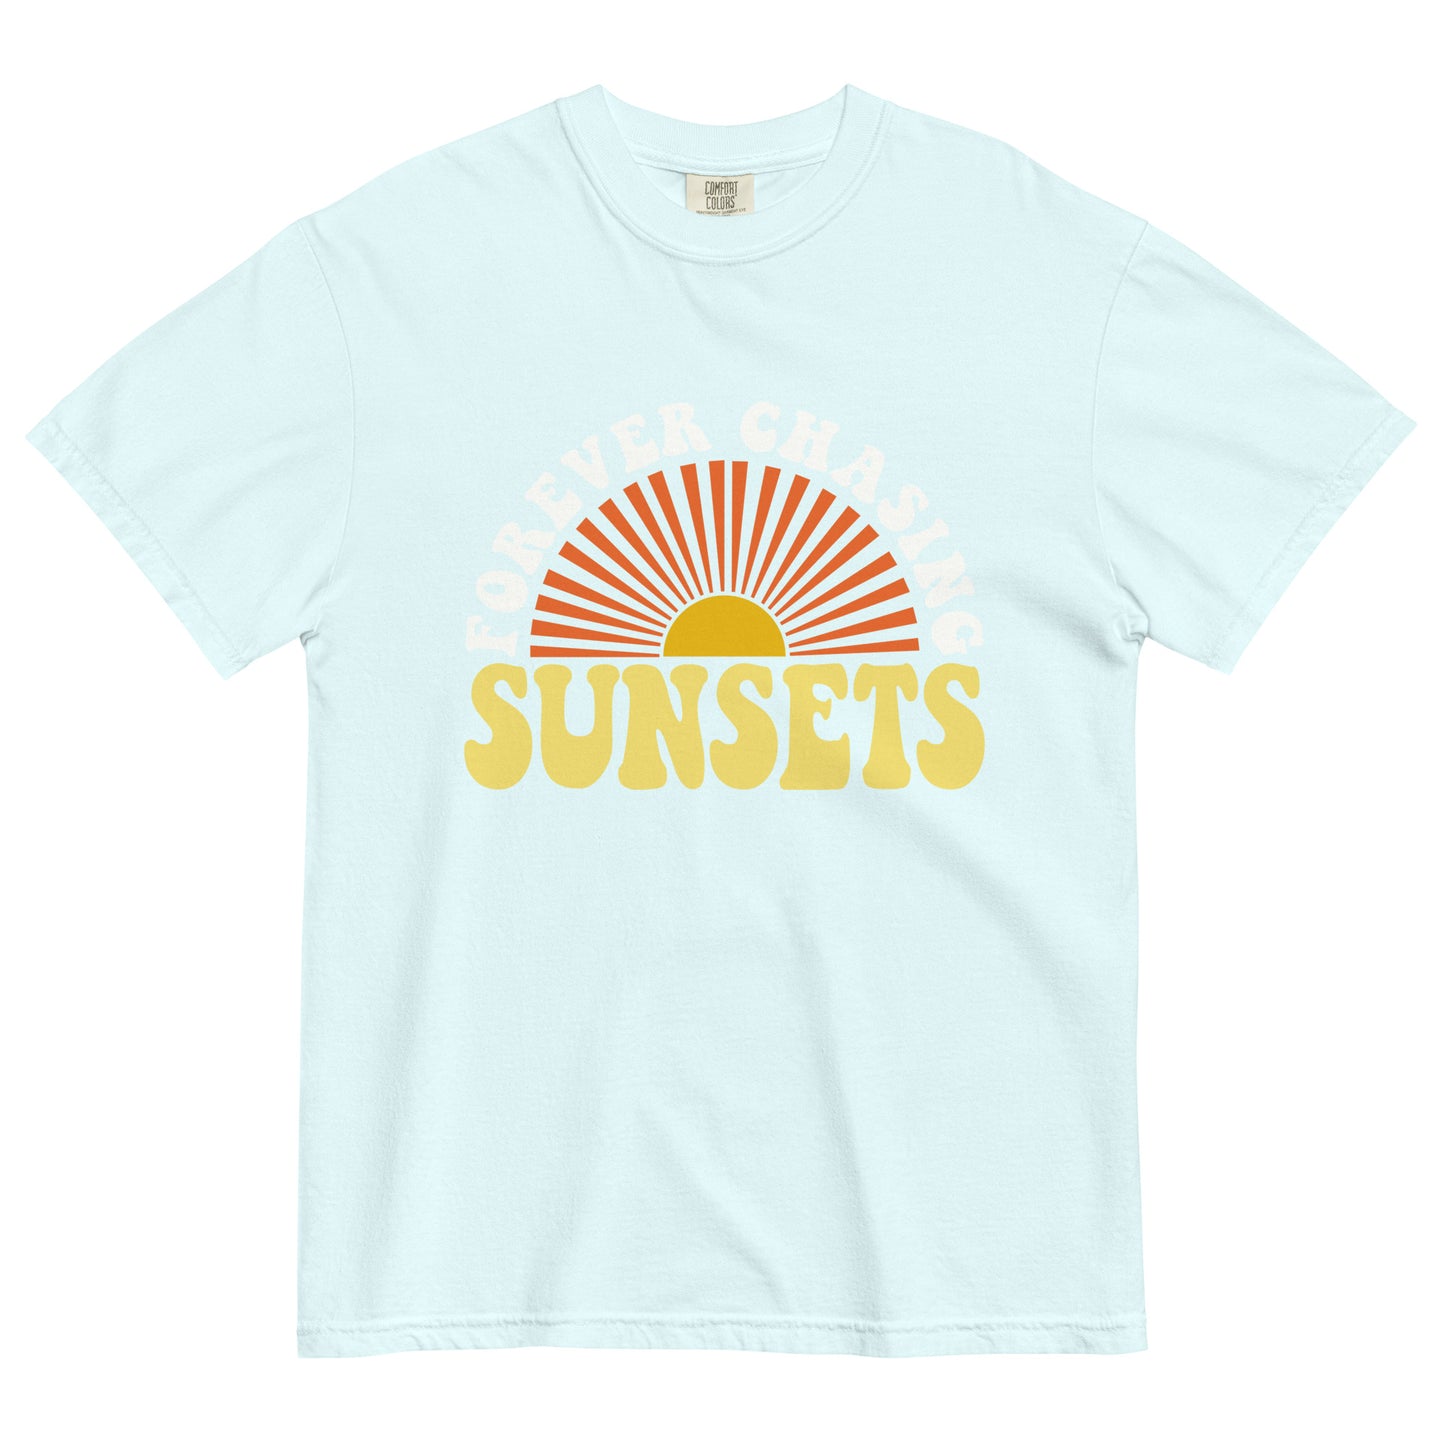 Forever Chasing Sunsets Comfort Colors T-shirt